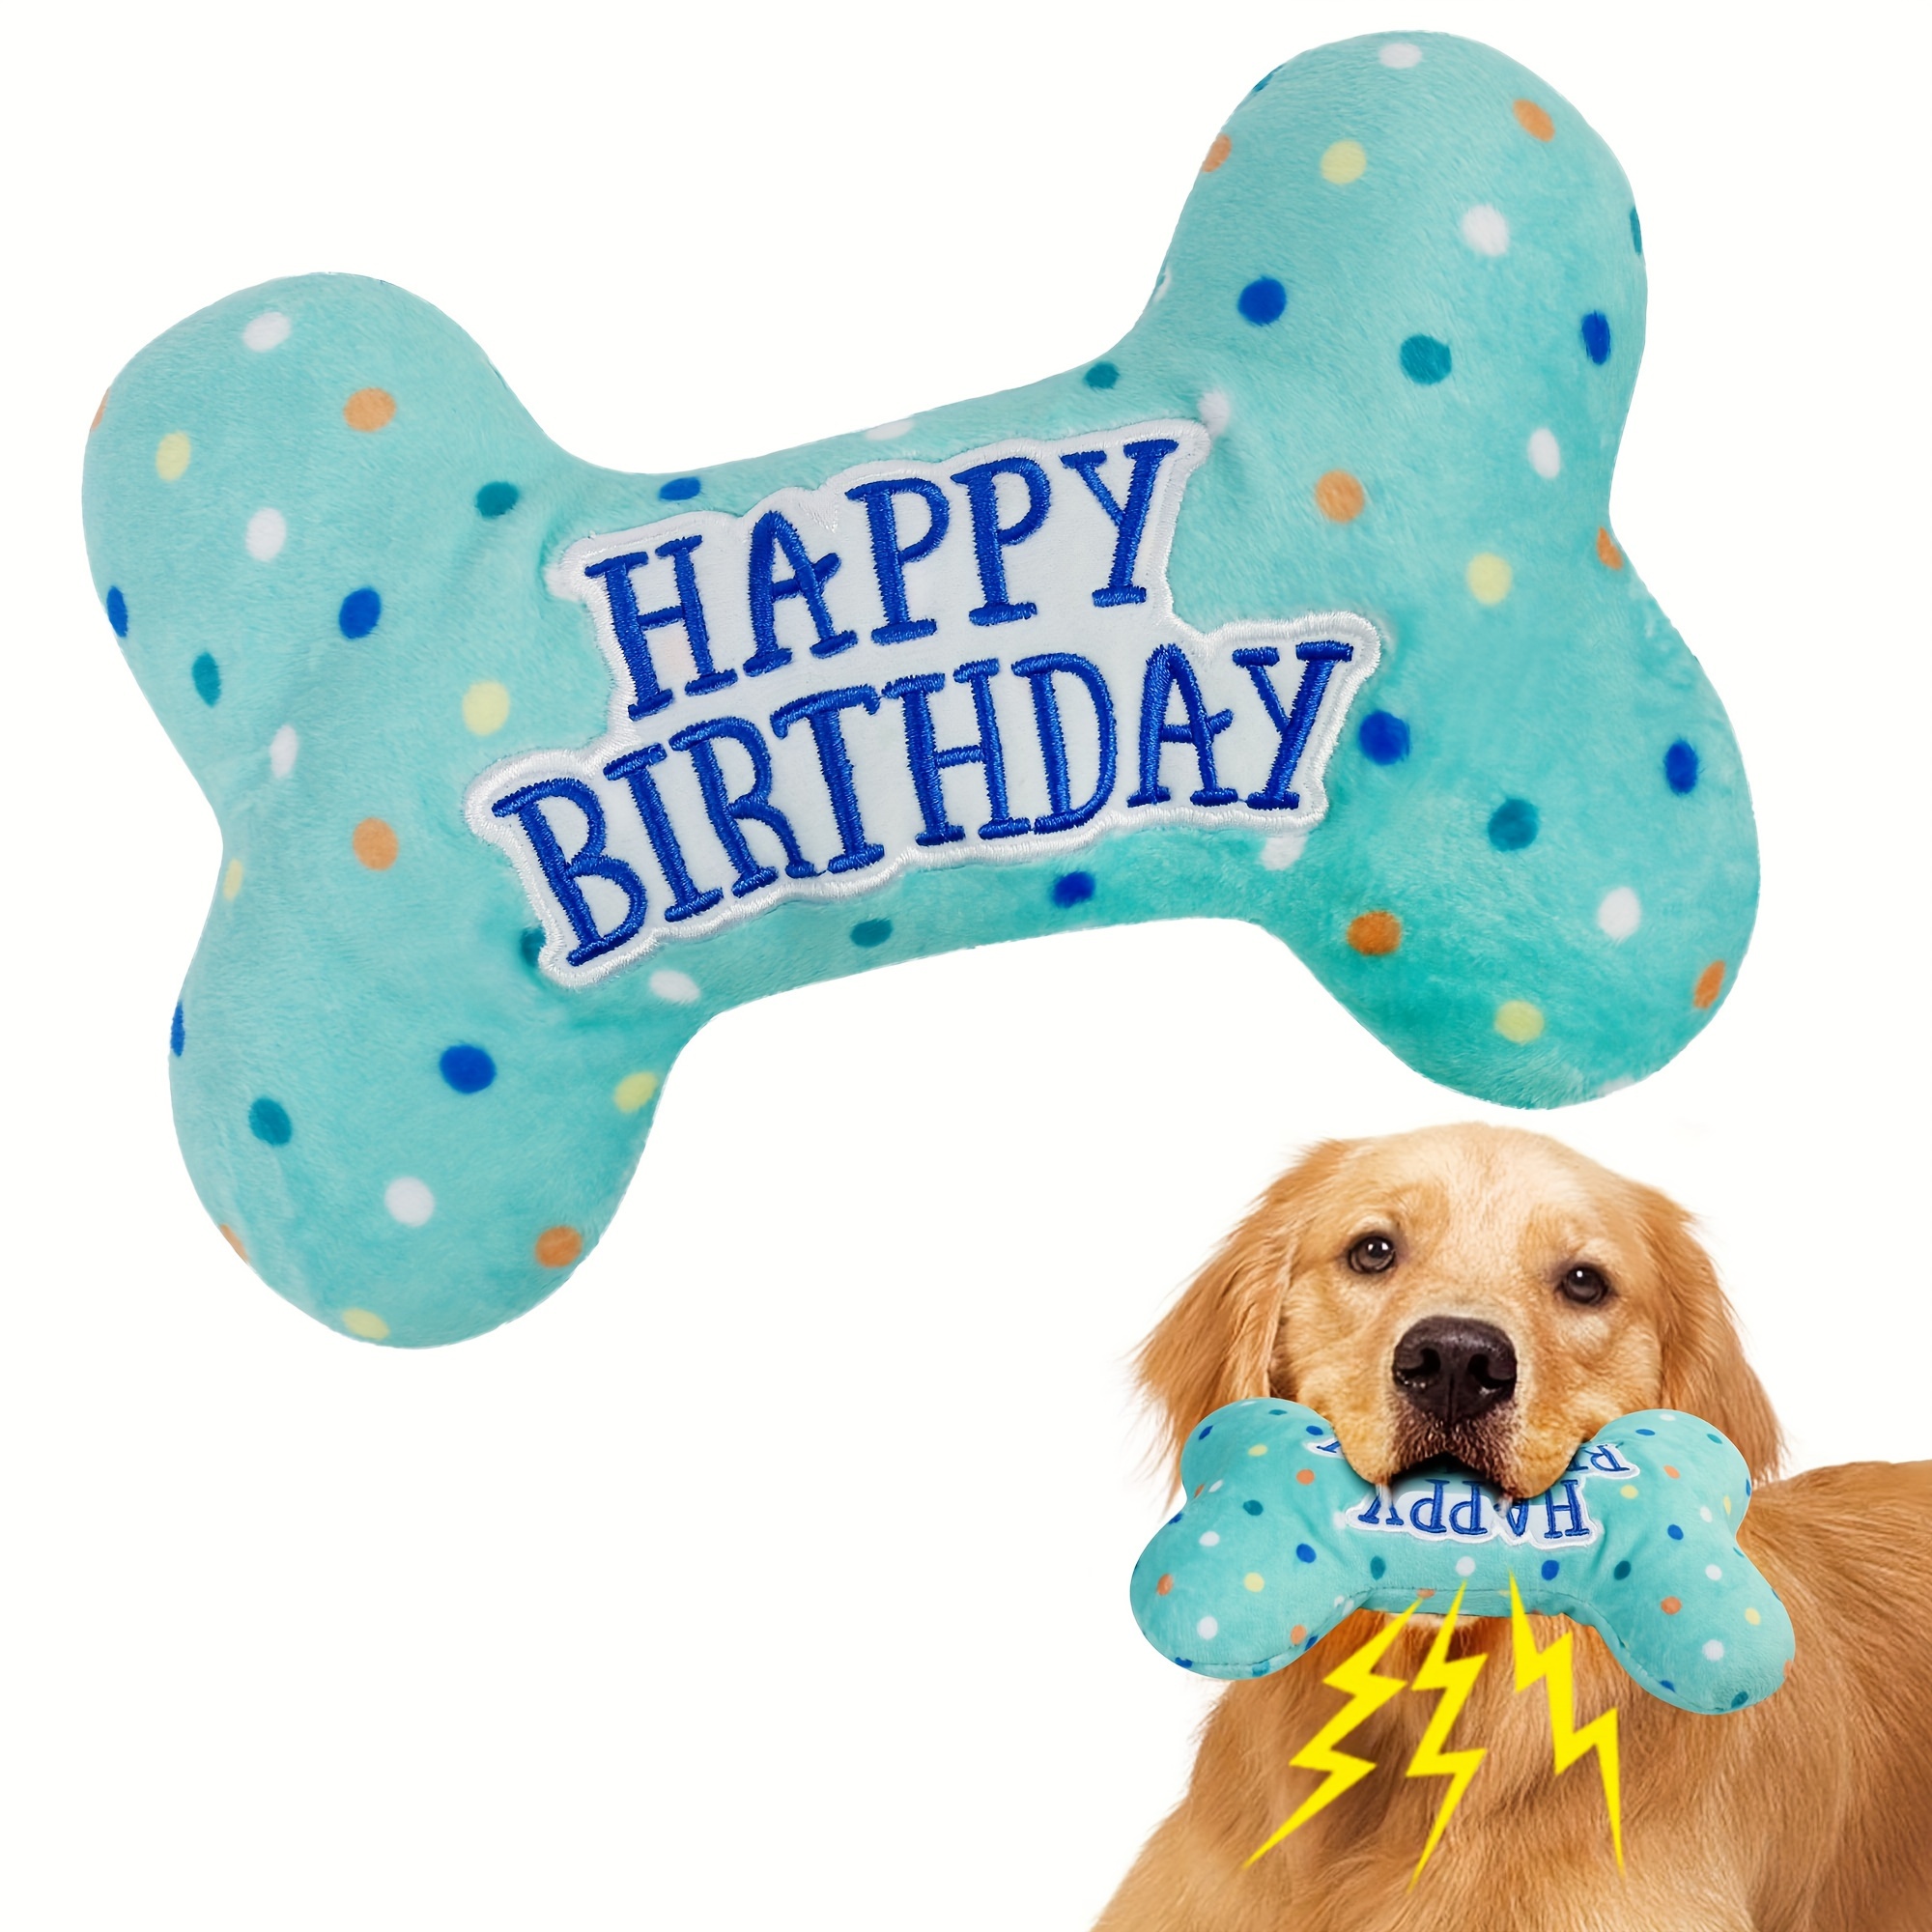 

Plush Squeaky Dog Toy - Bone-shaped Birthday Chew Toy For All Breeds, Soft Fabric Interactive Play & Teething Relief